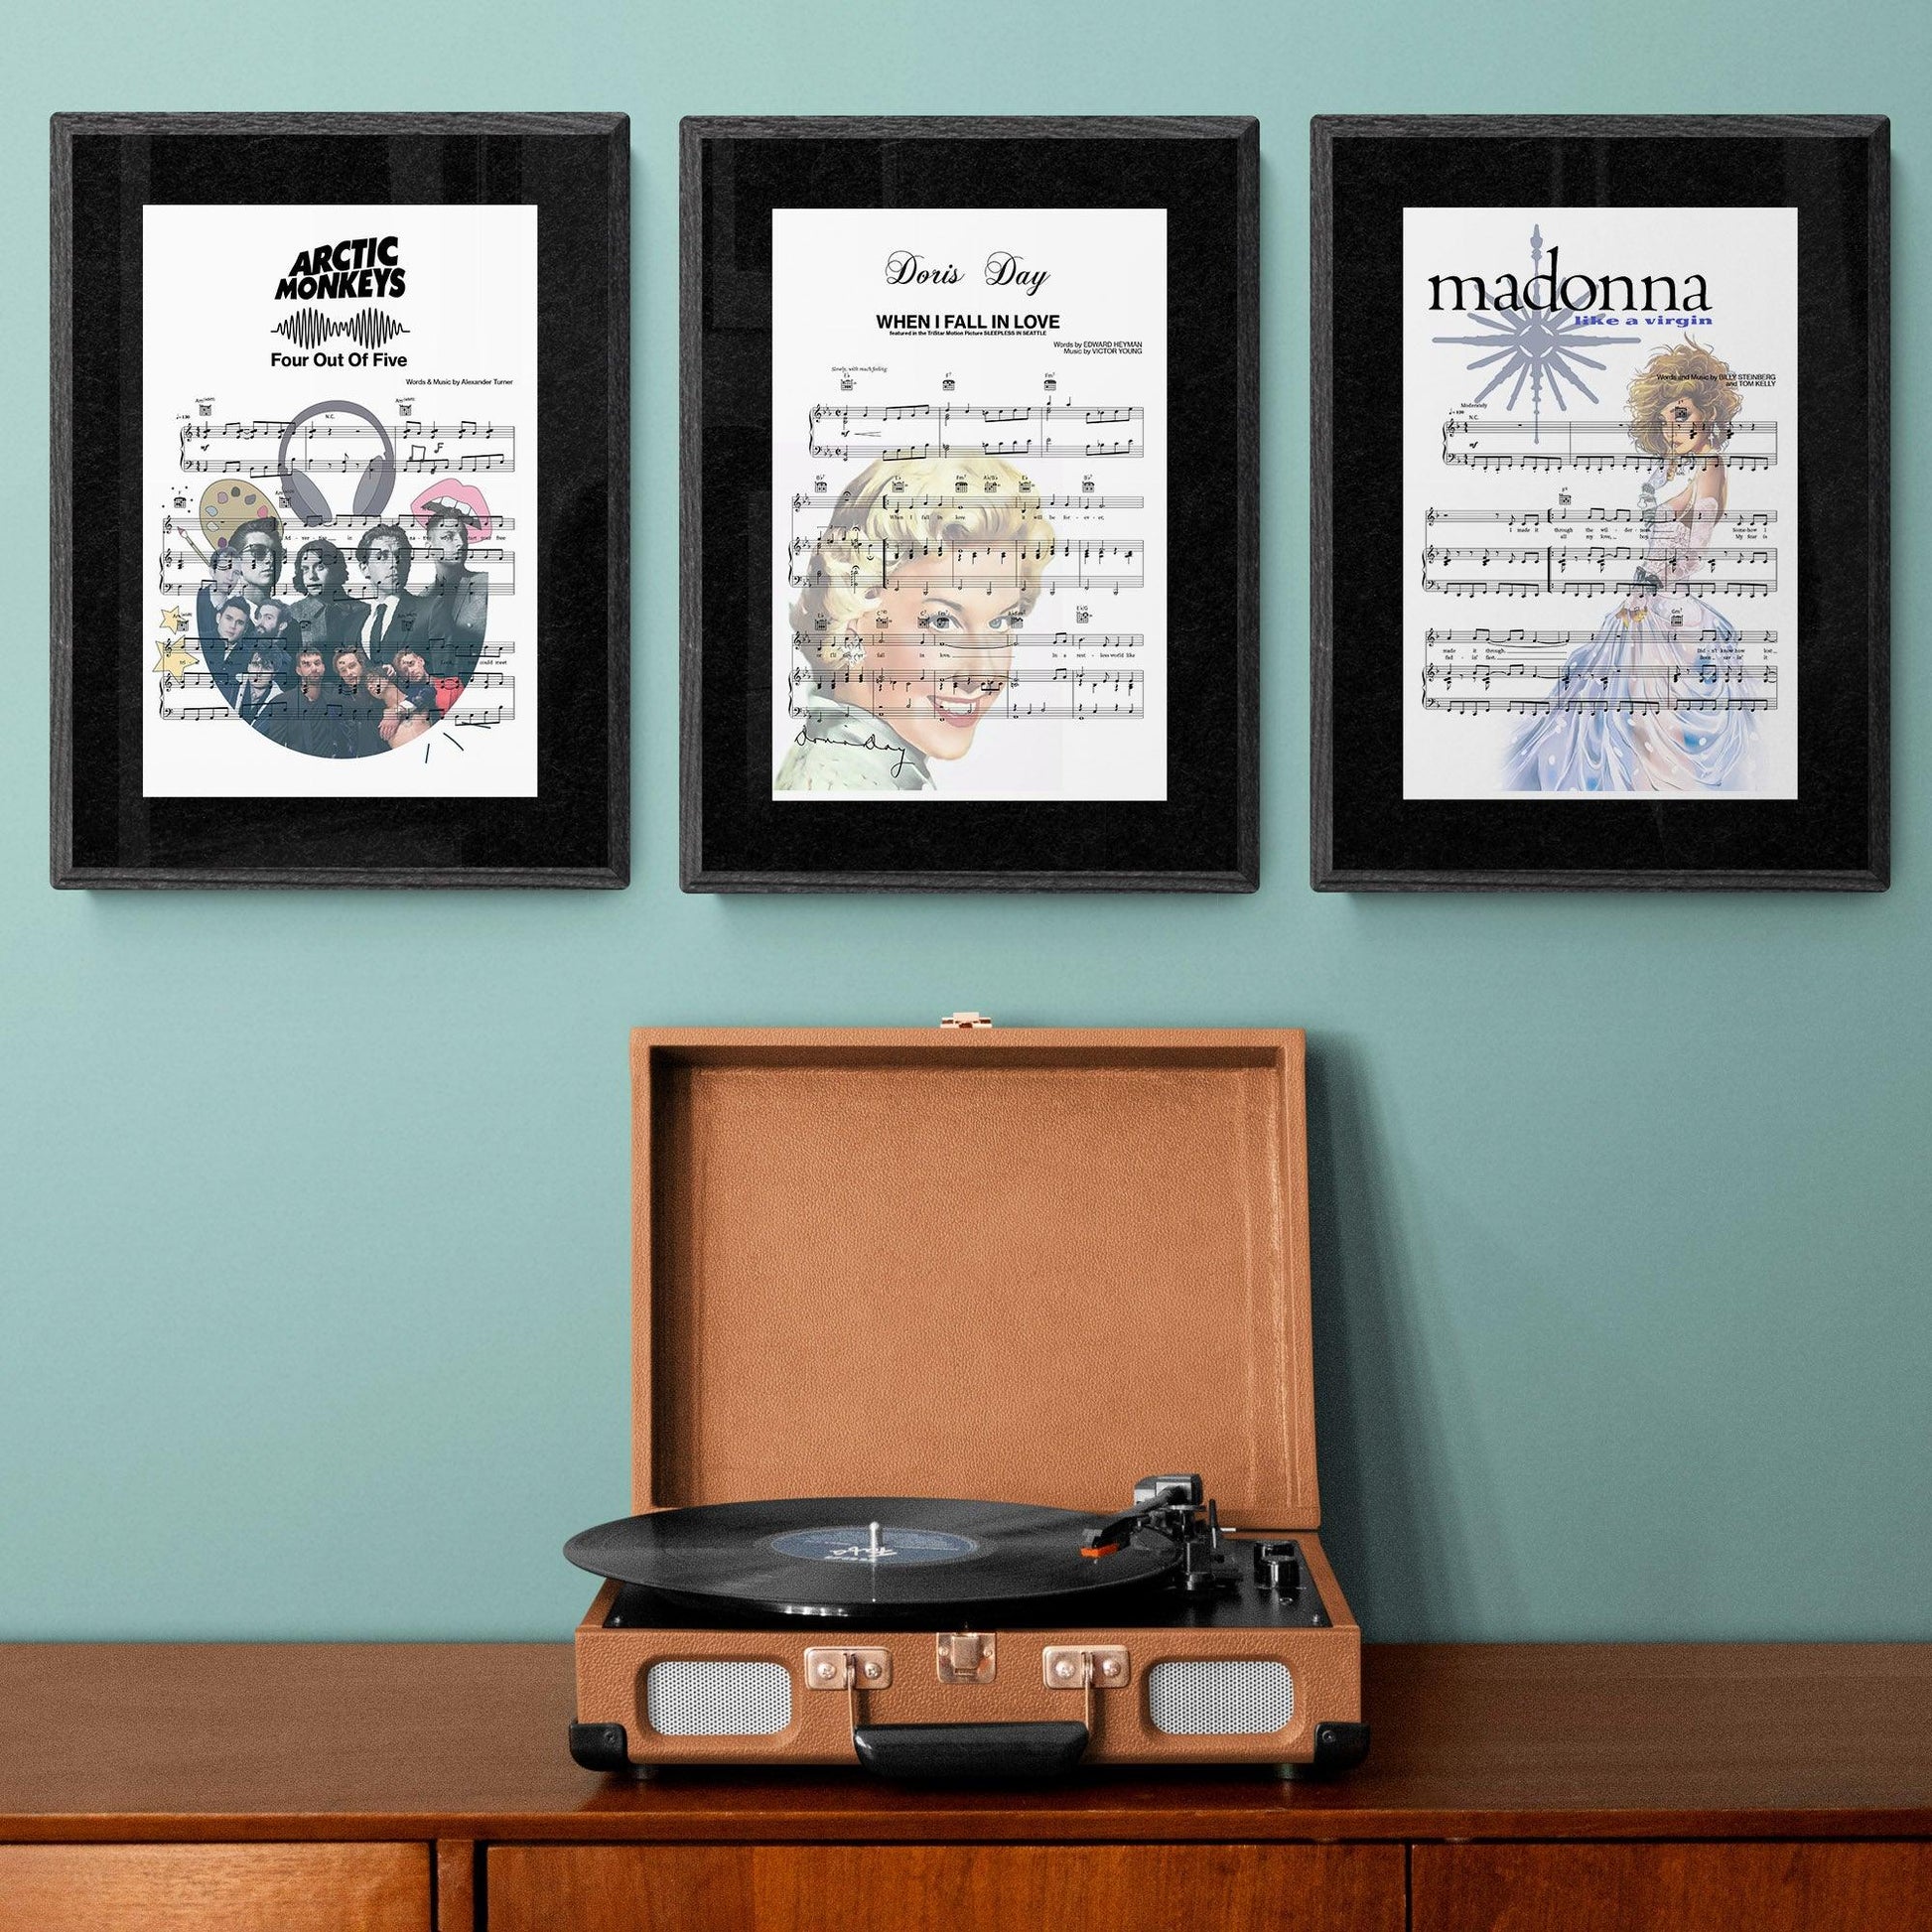 Doris Day - When I Fall In Love Song Print | Song Music Sheet Notes Print Everyone has a favorite song especially Doris Day Print, and now you can show the score as printed staff. The personal favorite song sheet print shows the song chosen as the score. 